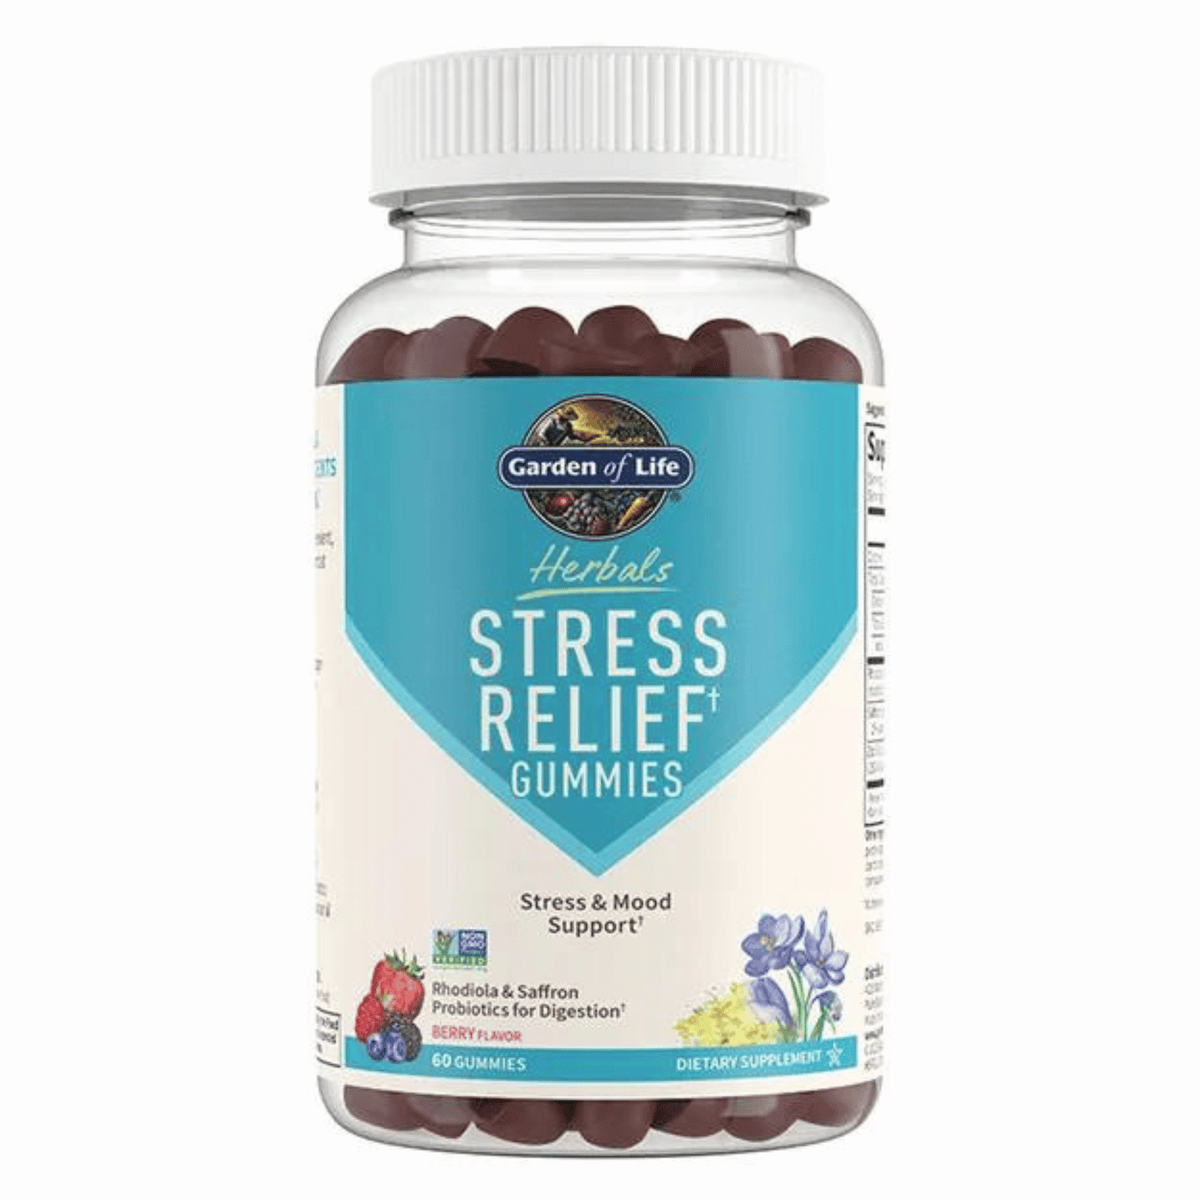 Primary Image of Stress Relief Gummies